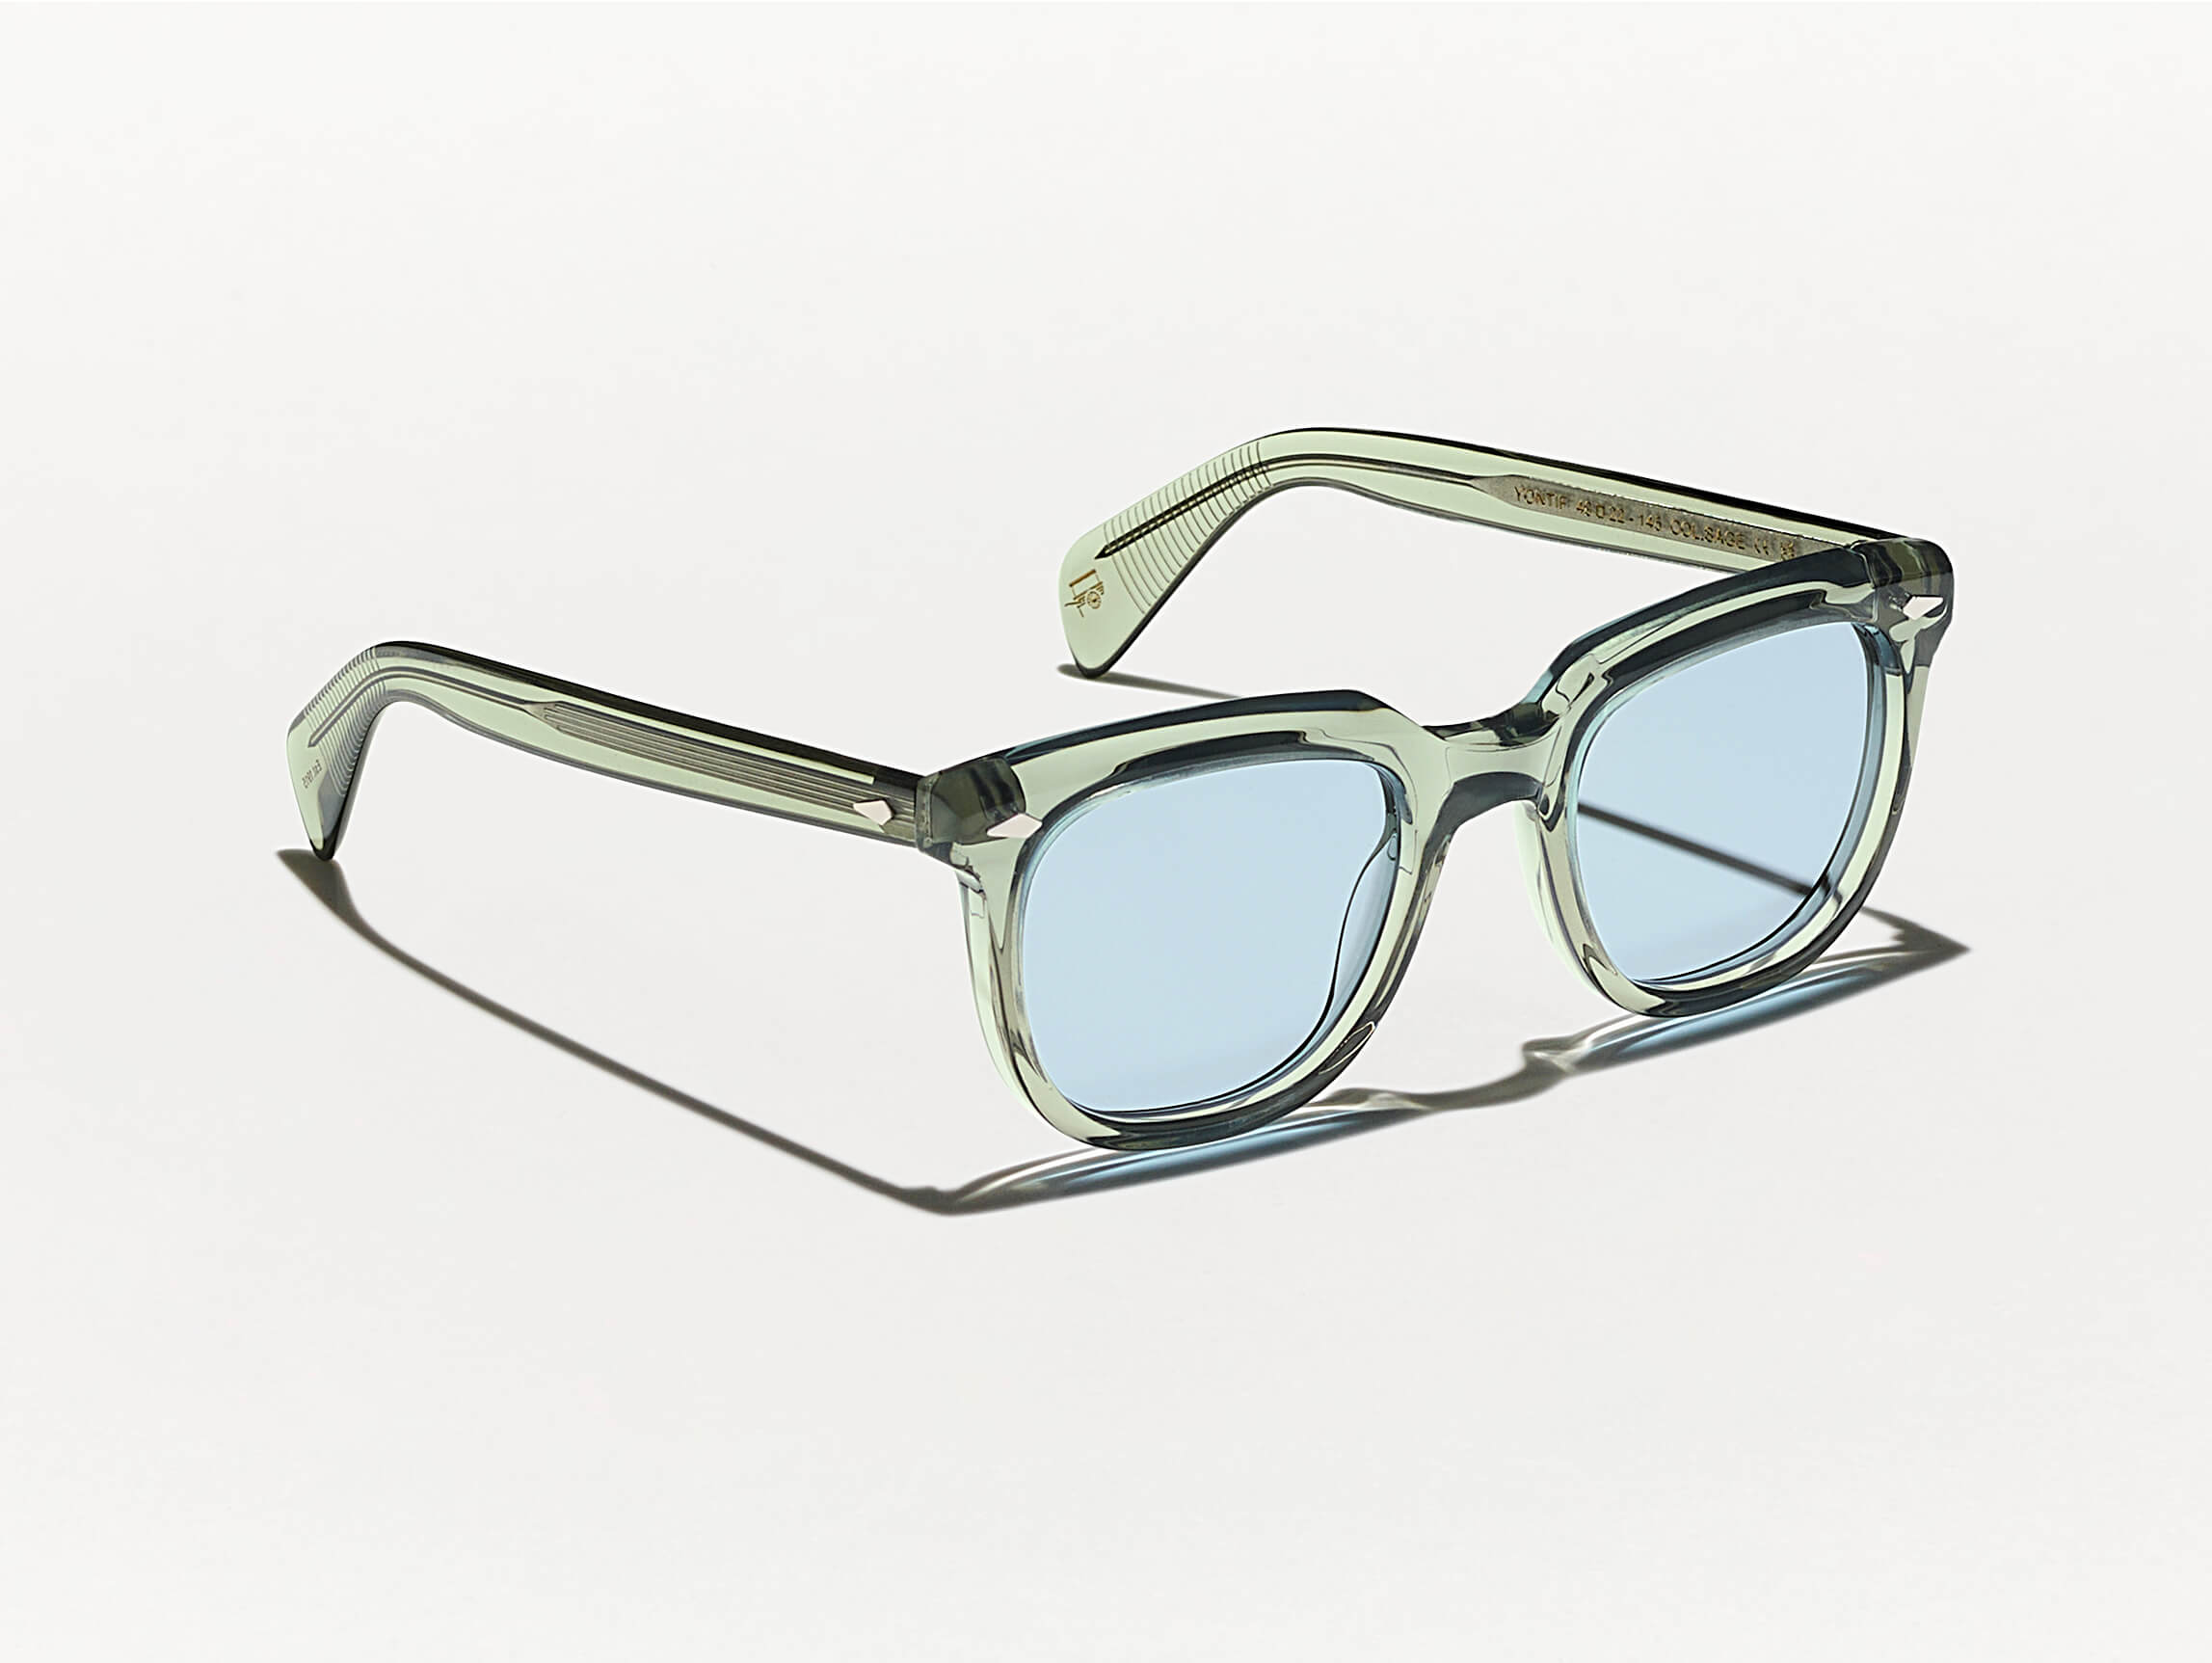 The YONTIF Pastel with Bel Air Blue Tinted Lenses